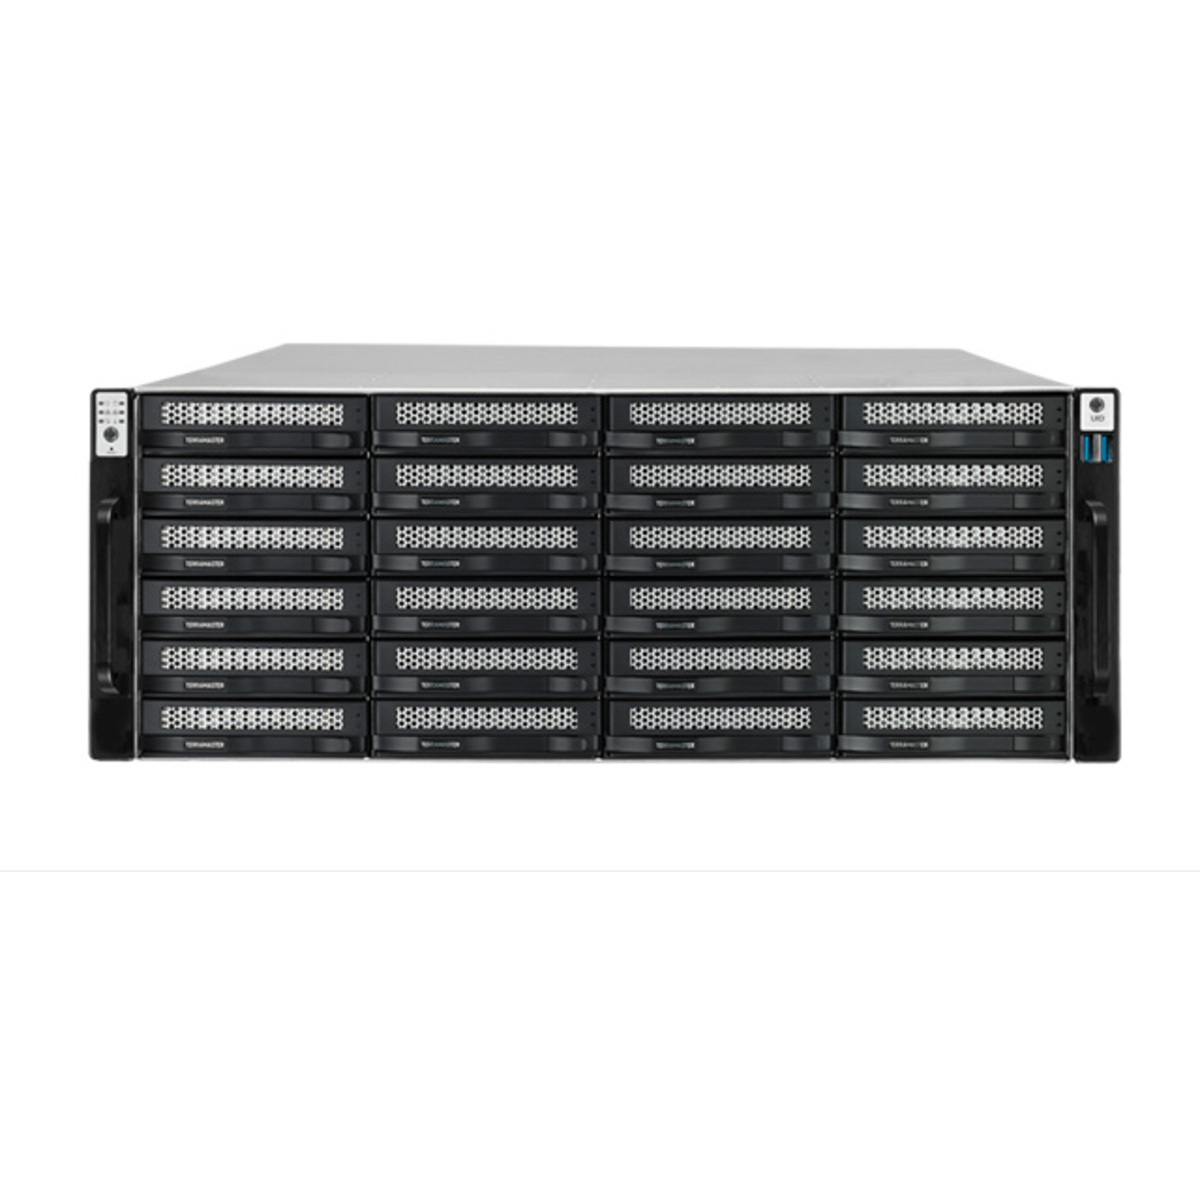 TerraMaster U24-722-2224 RackMount 24-Bay Large Business / Enterprise NAS - Network Attached Storage Device Burn-In Tested Configurations U24-722-2224